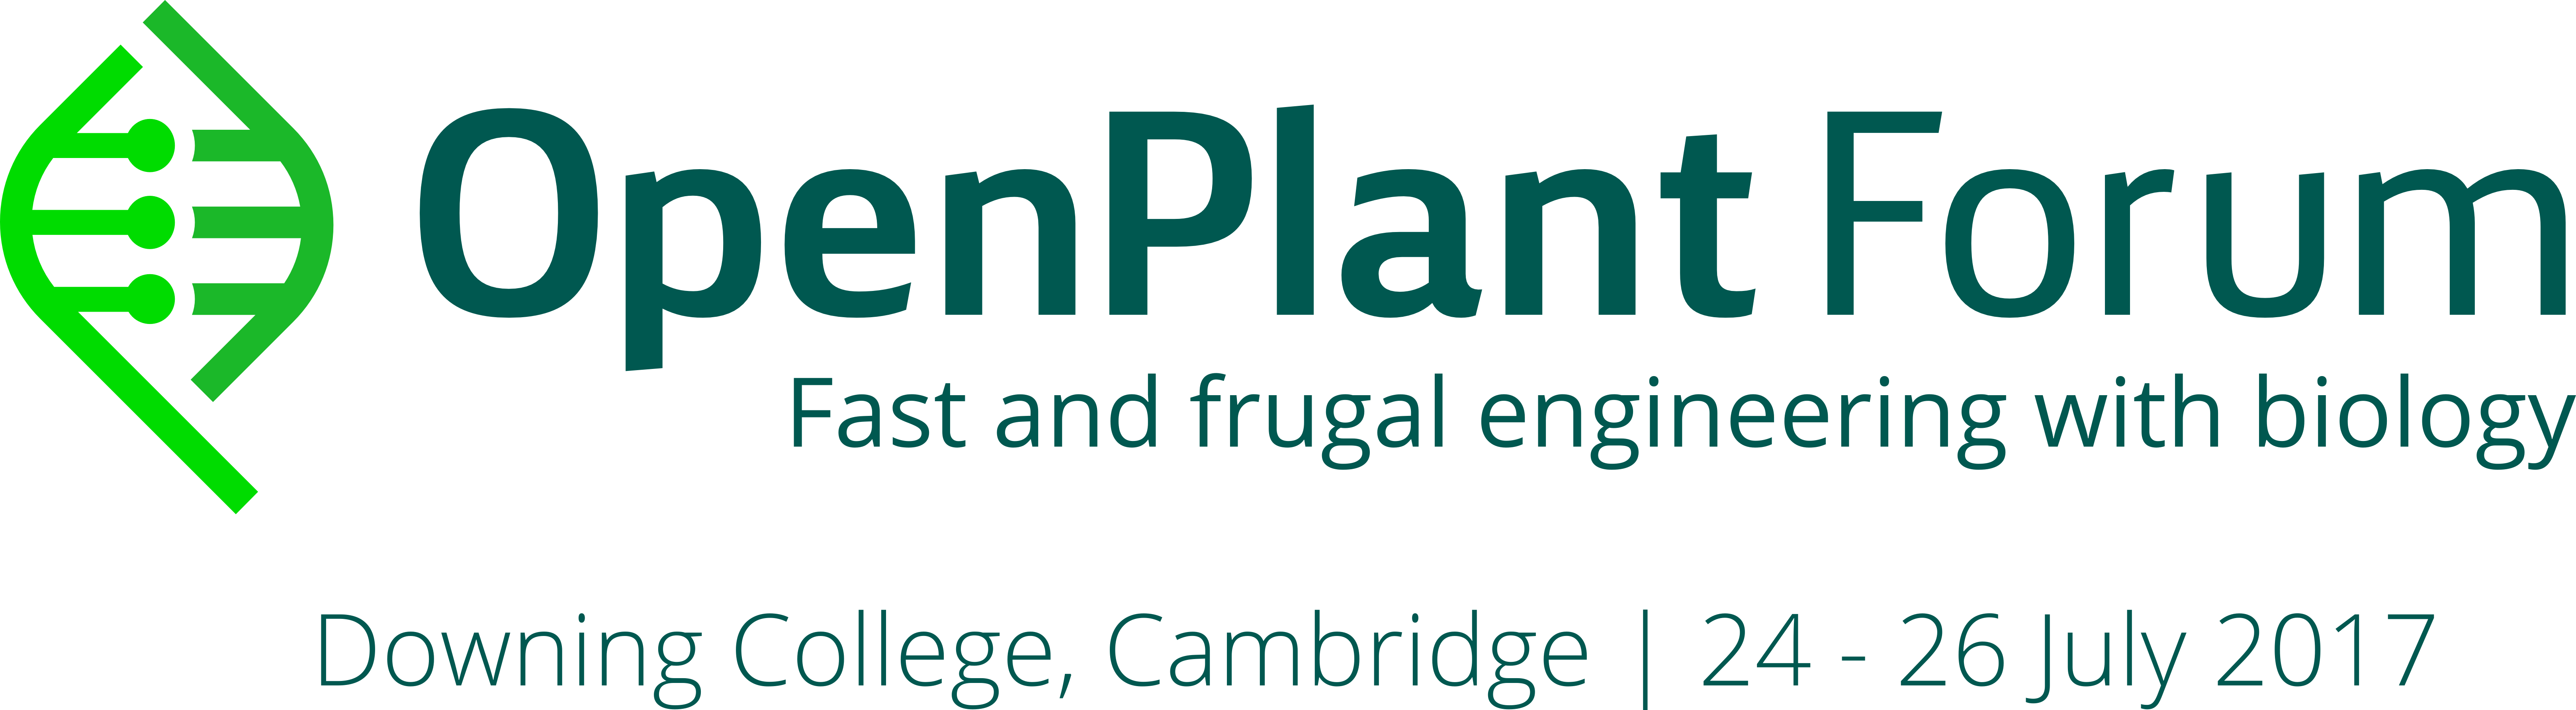 Registration opens for OpenPlant Forum in Cambridge, 24-26 July 2017